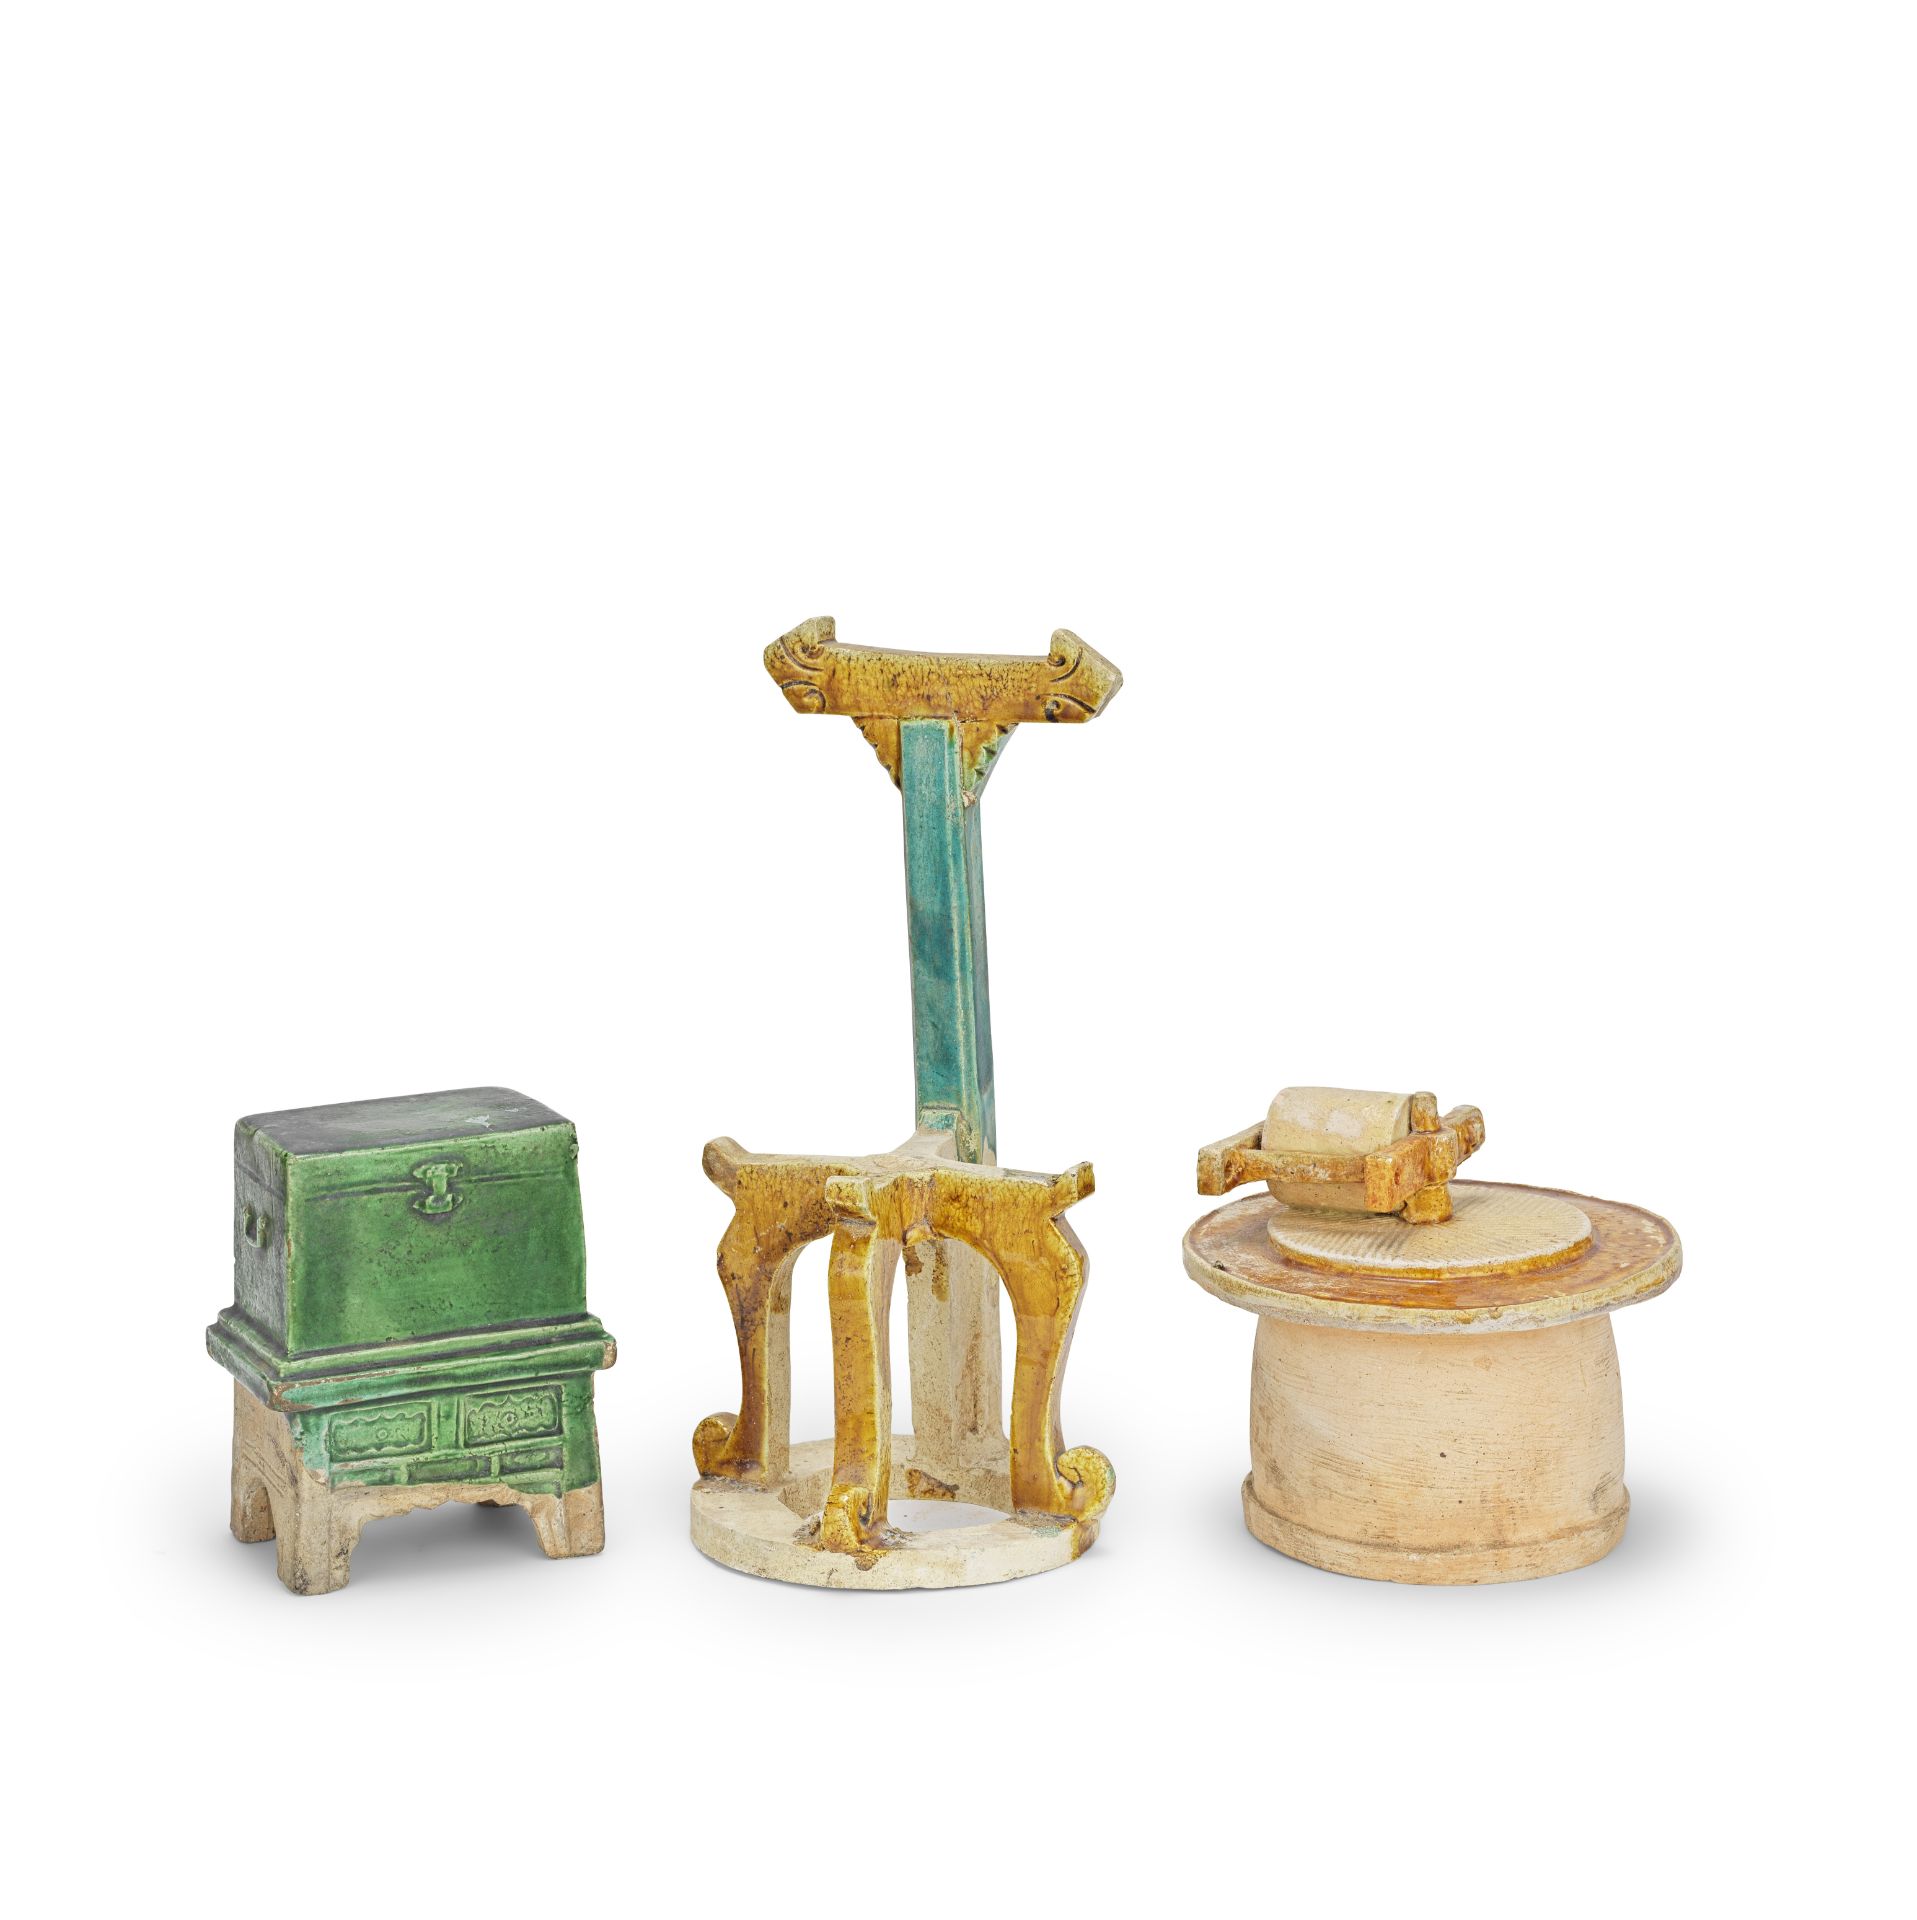 AN OCHRE-GLAZED MODEL OF A MILLSTONE, AN OCHRE AND TURQUOISE-GLAZED WASHSTAND AND A GREEN-GLAZED...